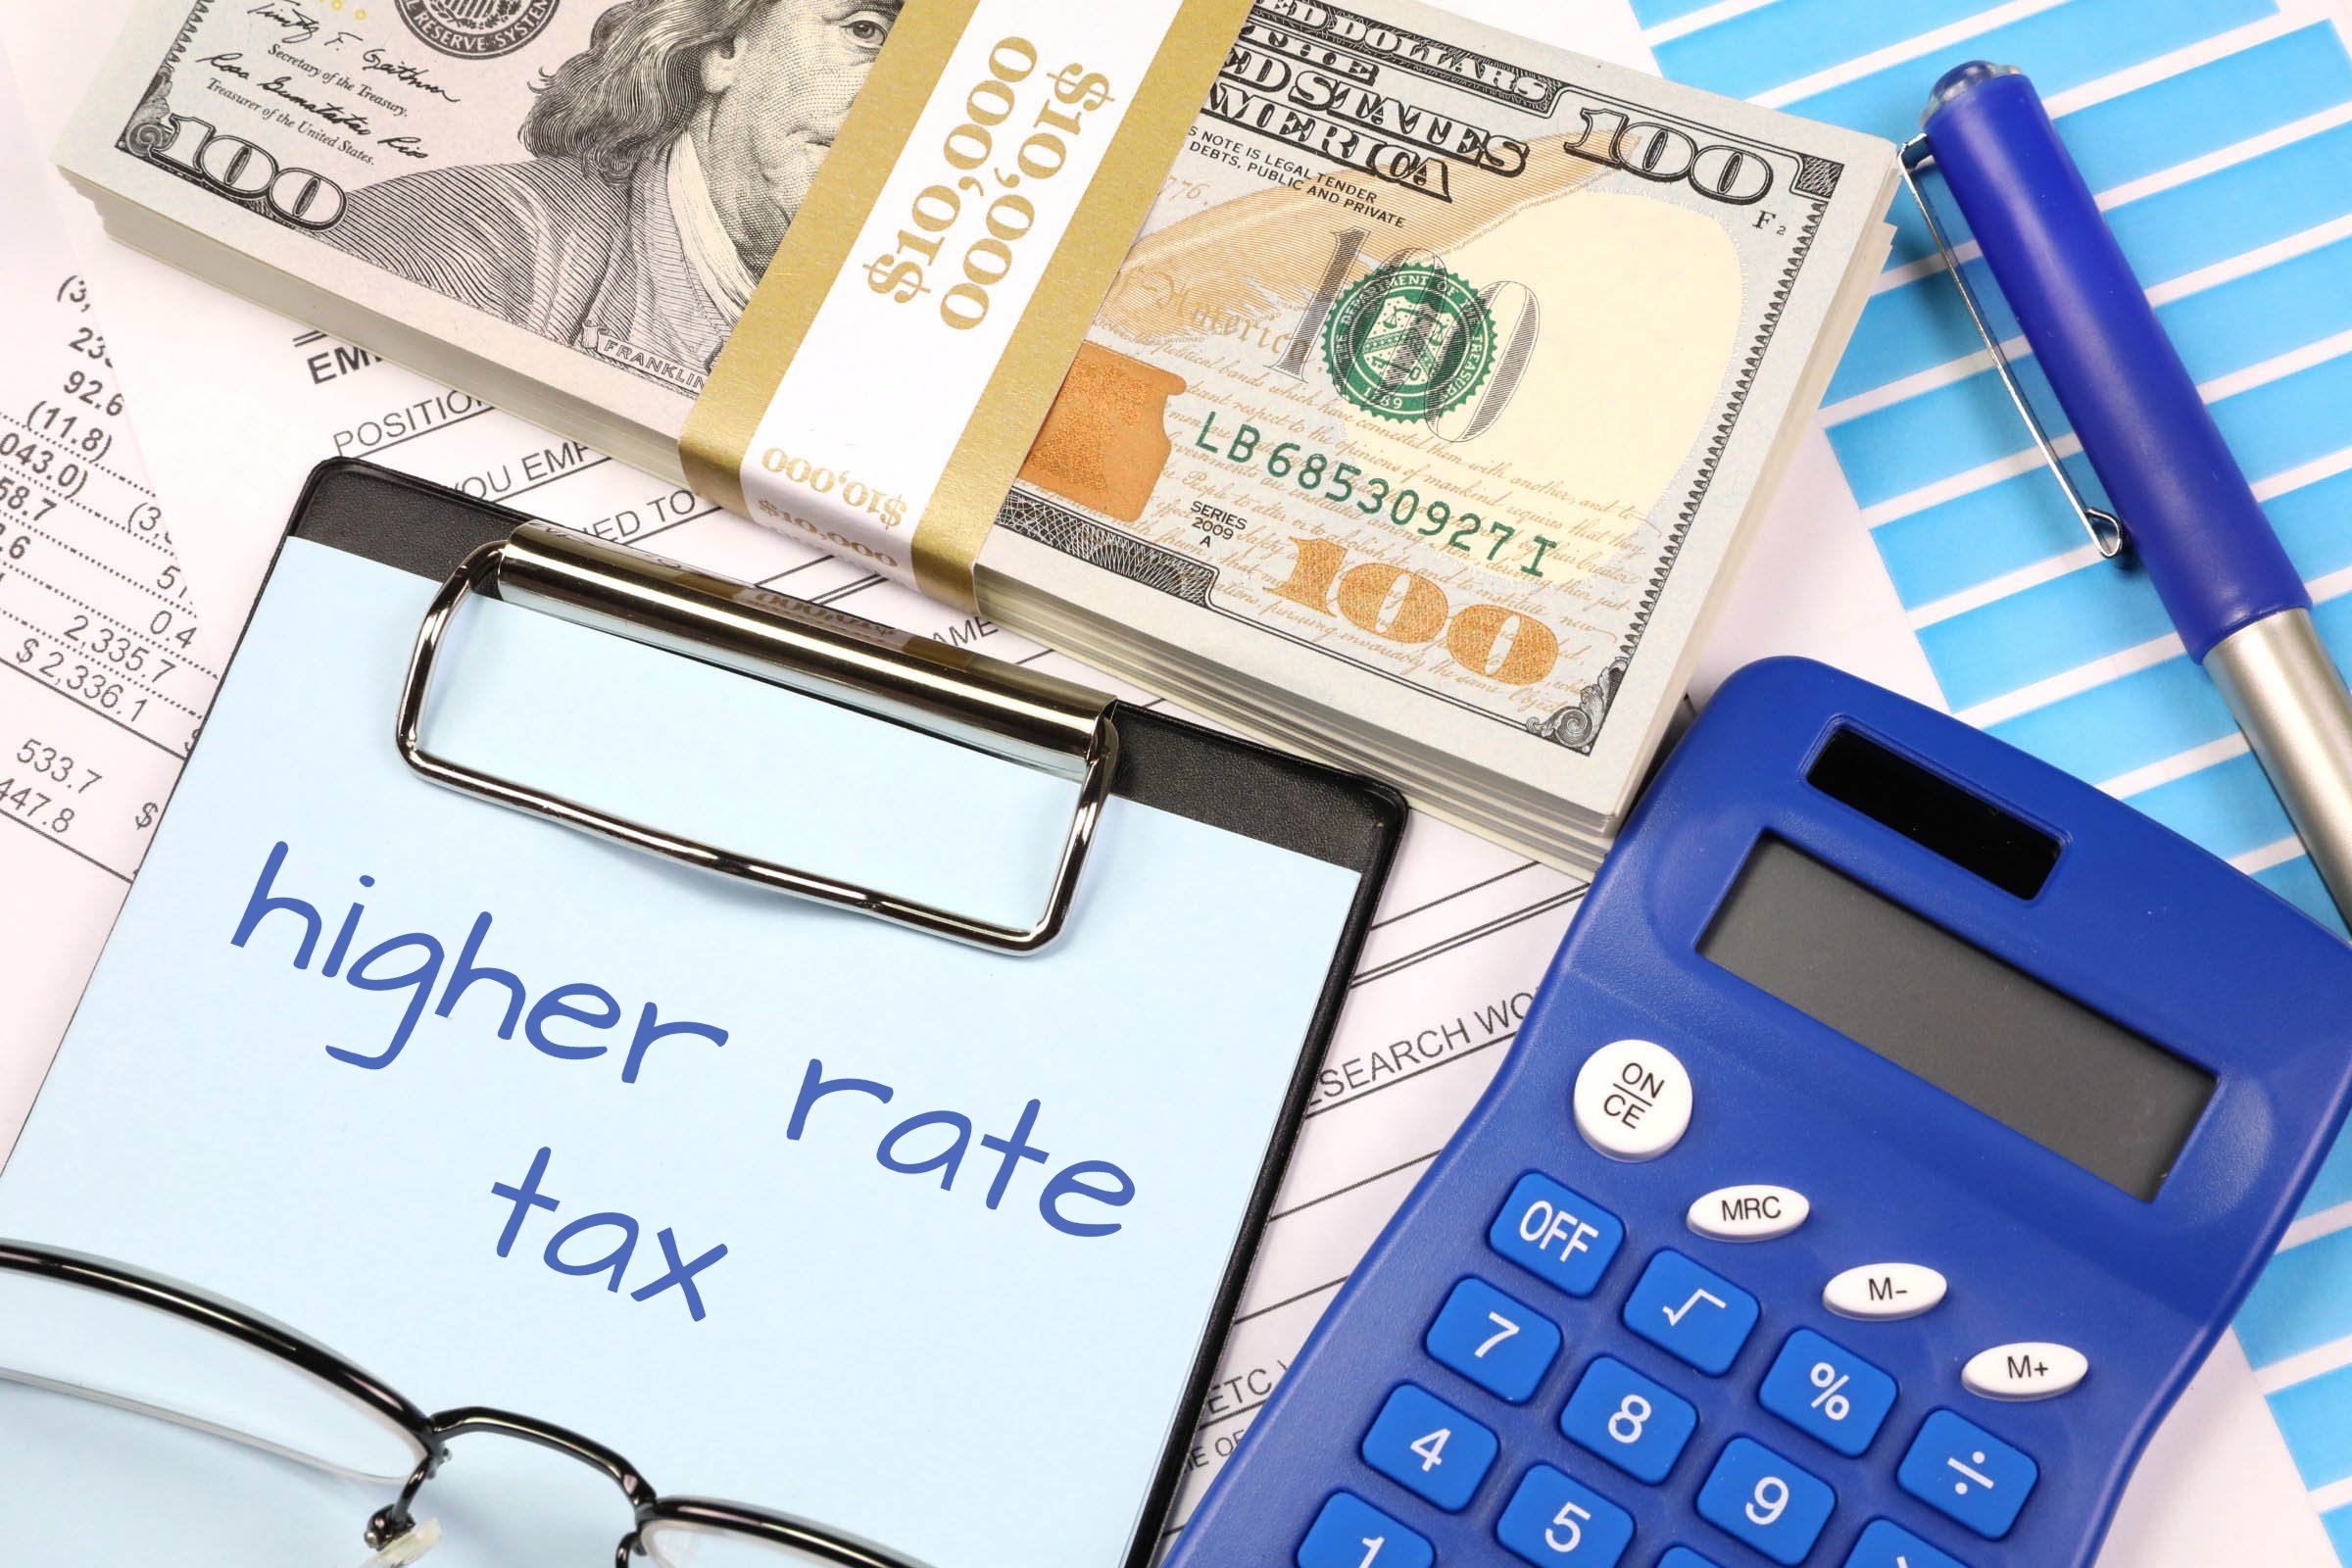 Higher Rate Tax